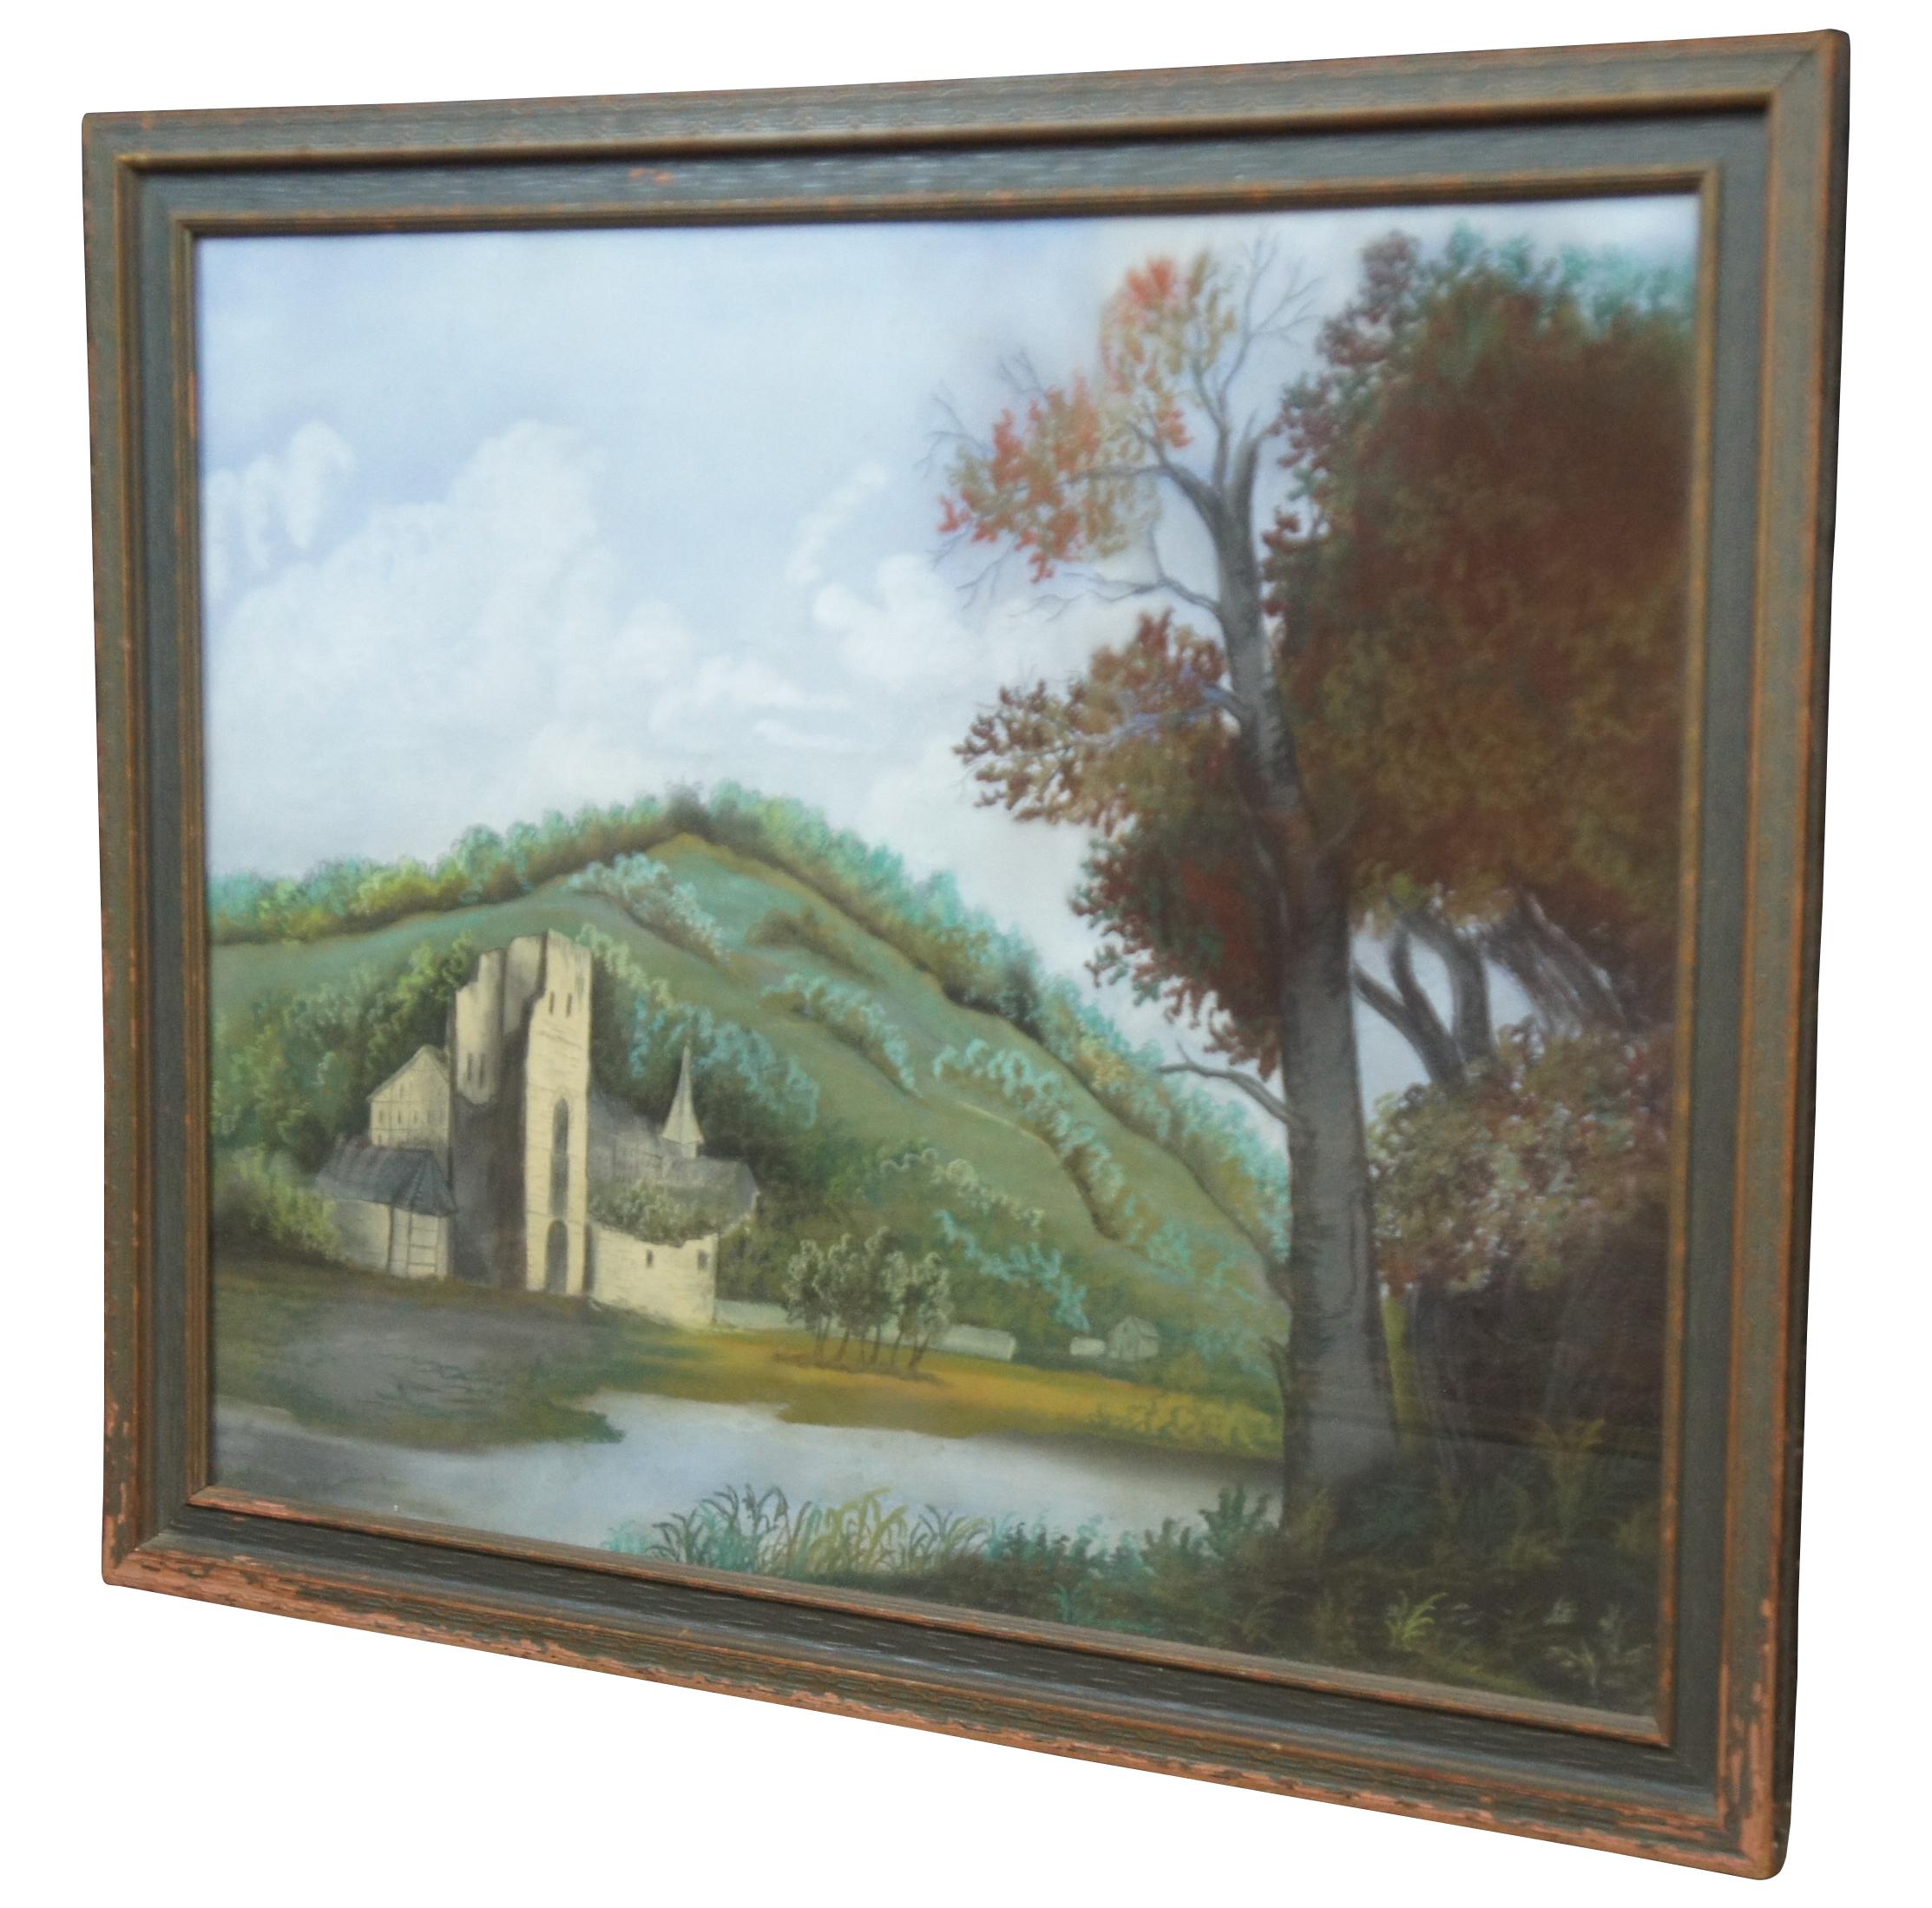 Mid century 1950s framed German pastel painting of a hilly landscape by a river centered on a stone castle or chateau and farmhouse. Purchased in the 50s in Frankfurt.

Measures: 32” x 0.75” x 26.5” / Sans Frame - 28” x 22.75” (Width x Depth x